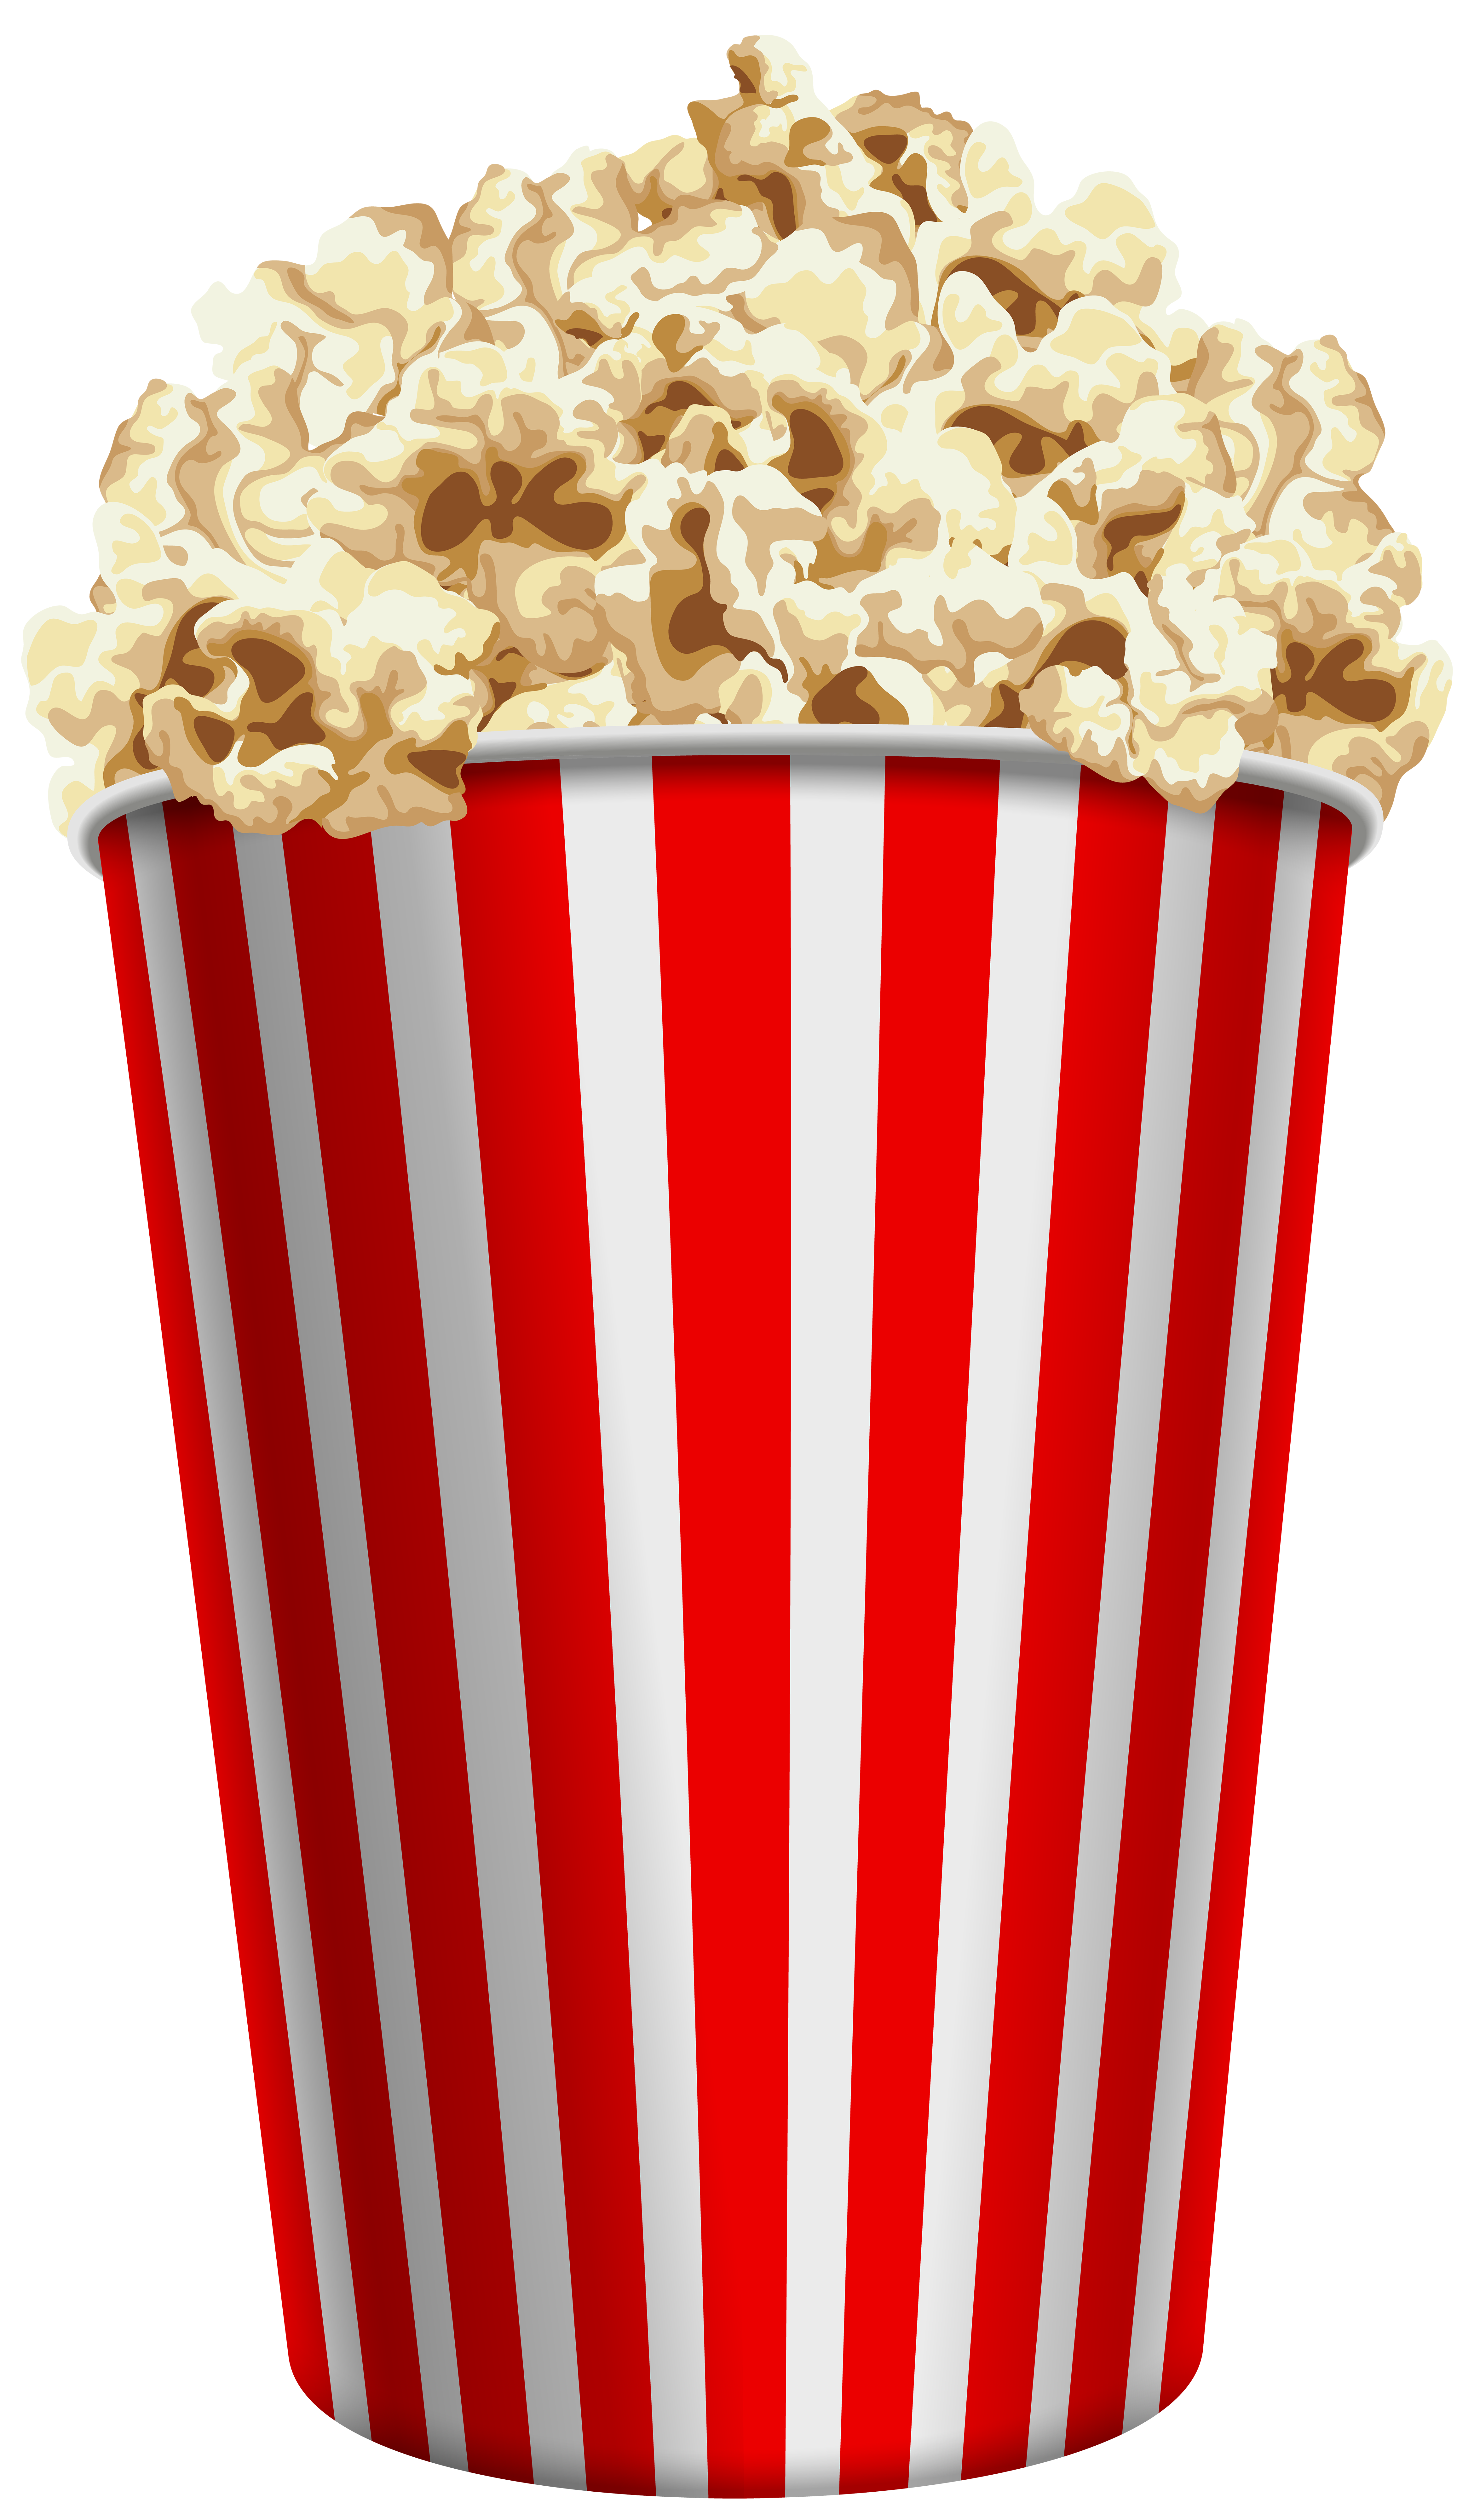 popcorn png clip art gallery yopriceville high quality images and transparent png free clipart gallery yopriceville